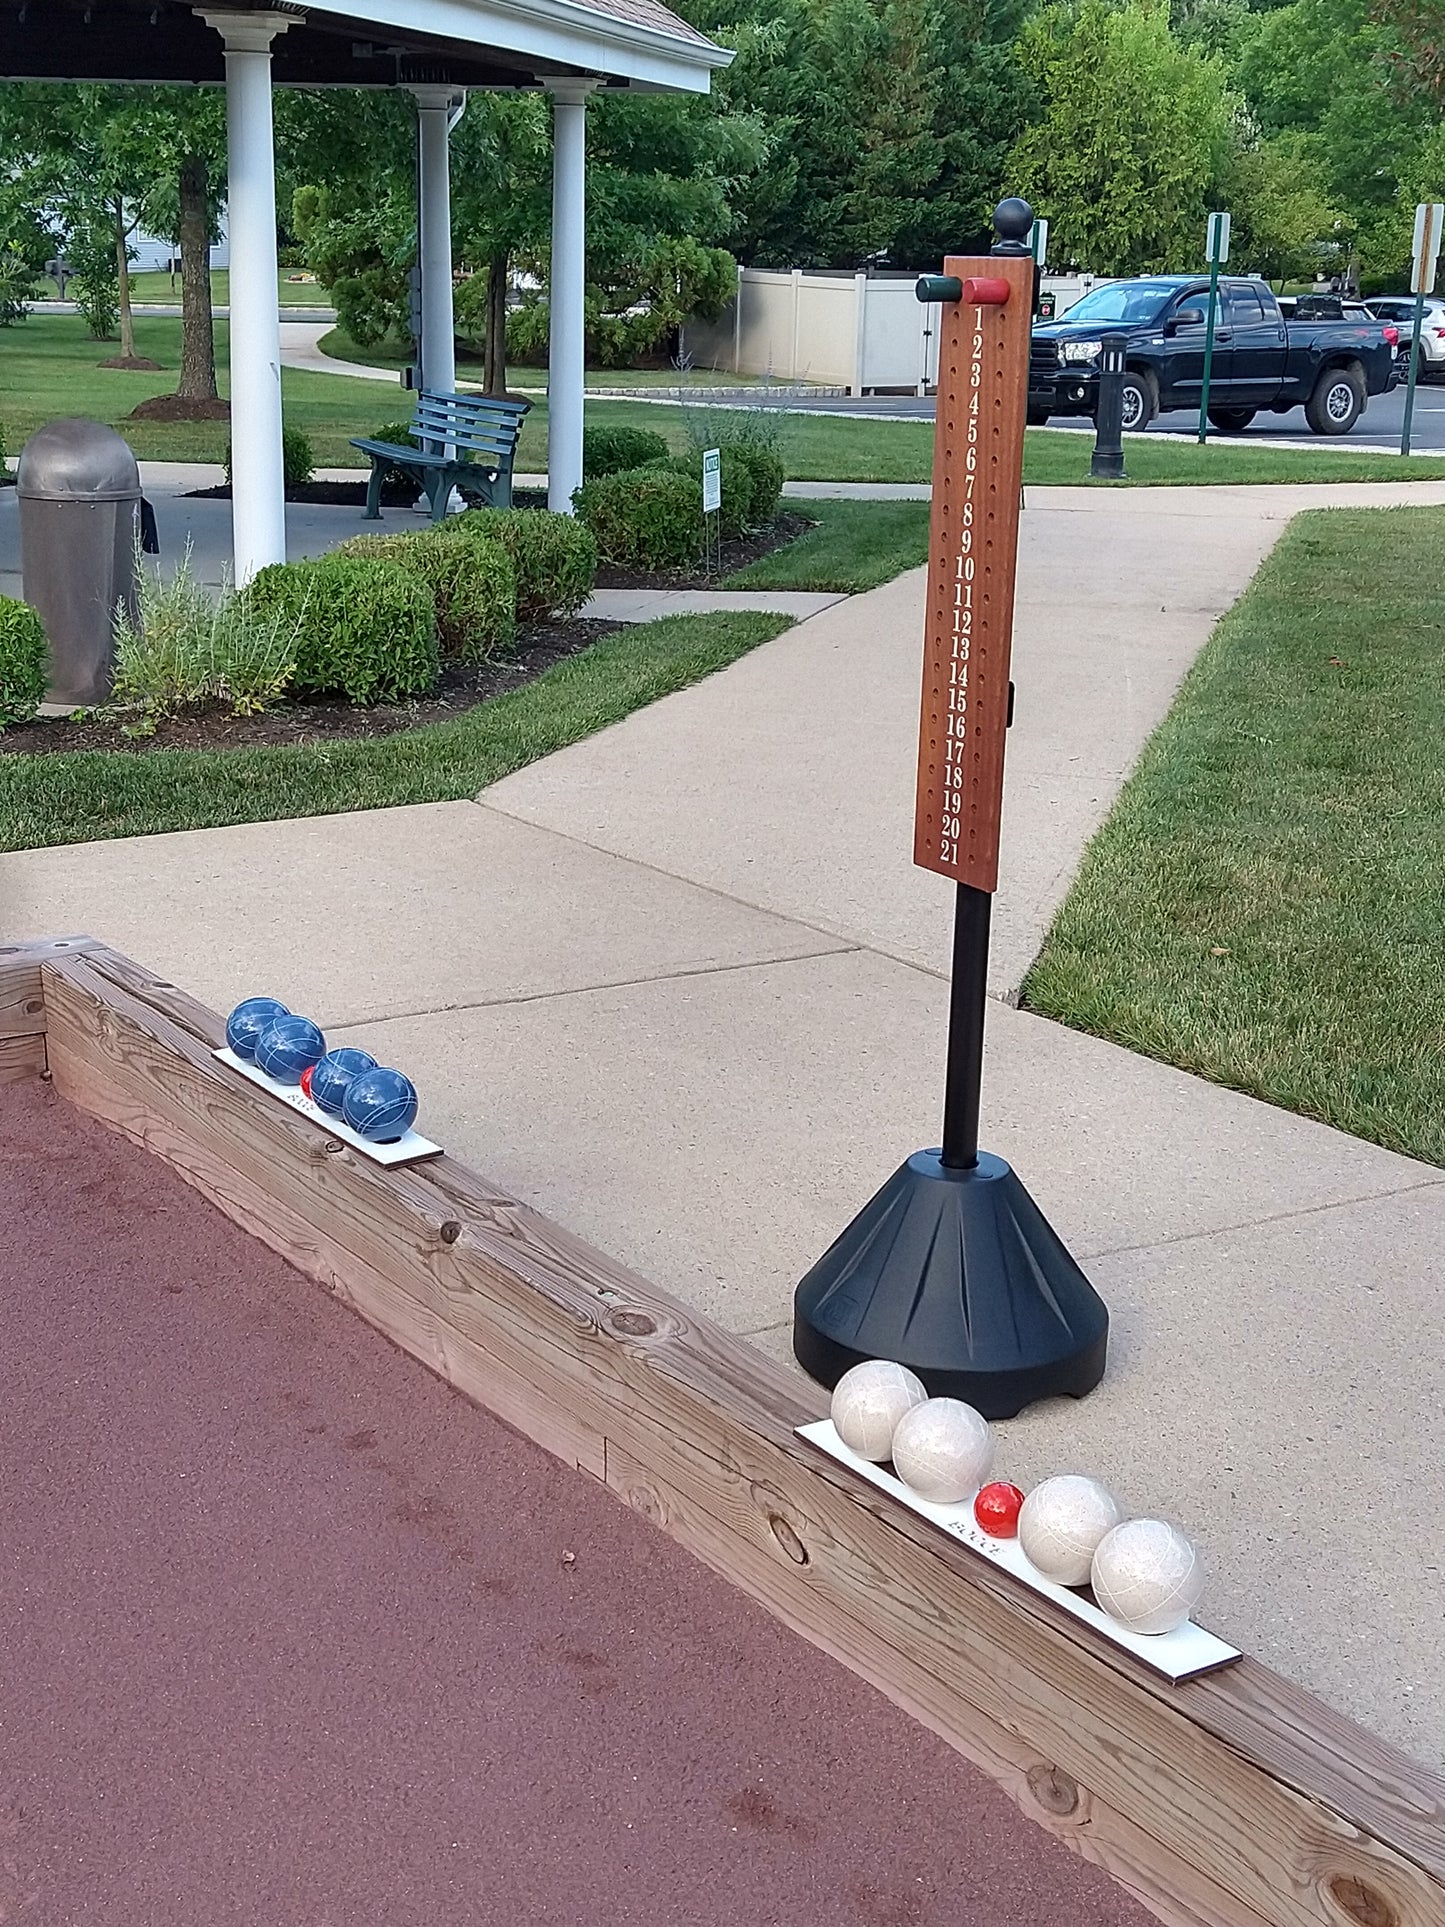 Bocce ball racks on court edging with scoreboard and stand